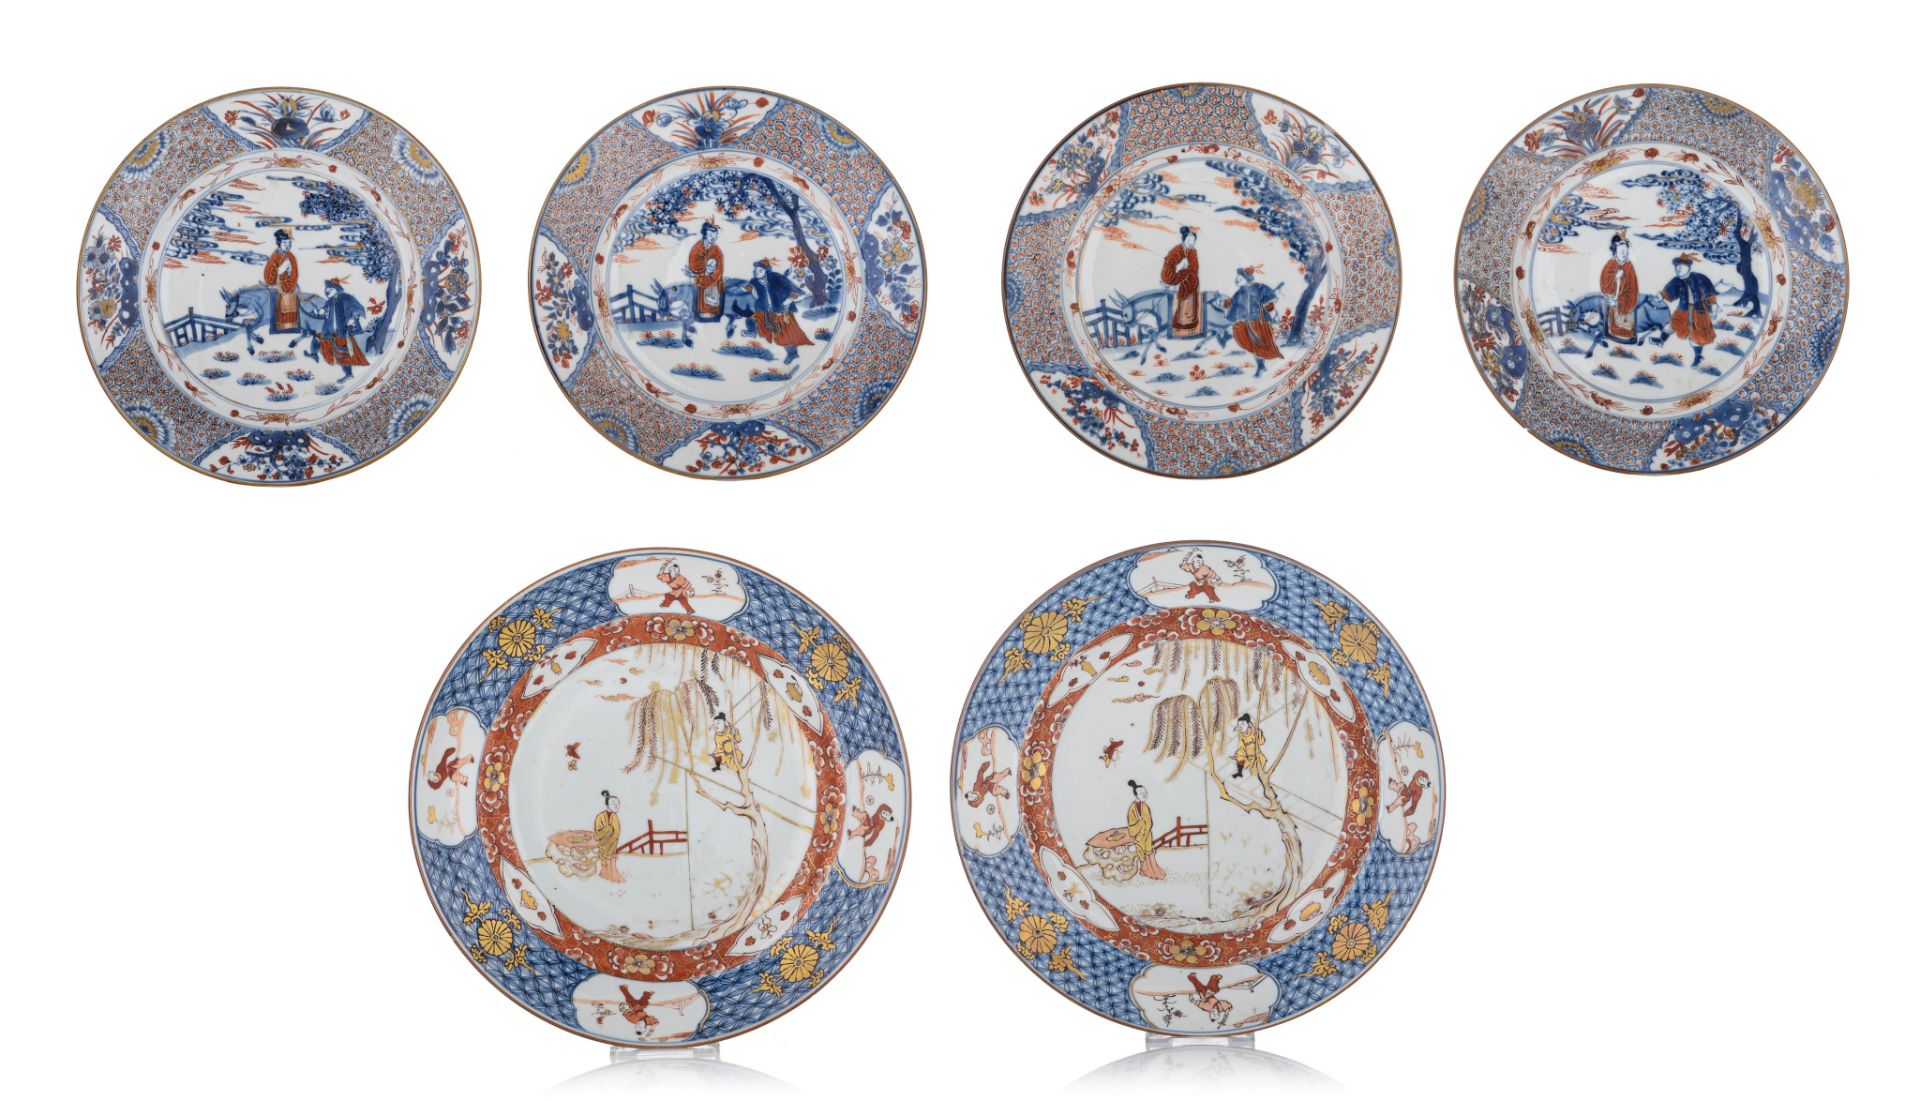 (BIDDING ONLY ON CARLOBONTE.BE) A collection of fine Chinese Imari figural export porcelain plates,